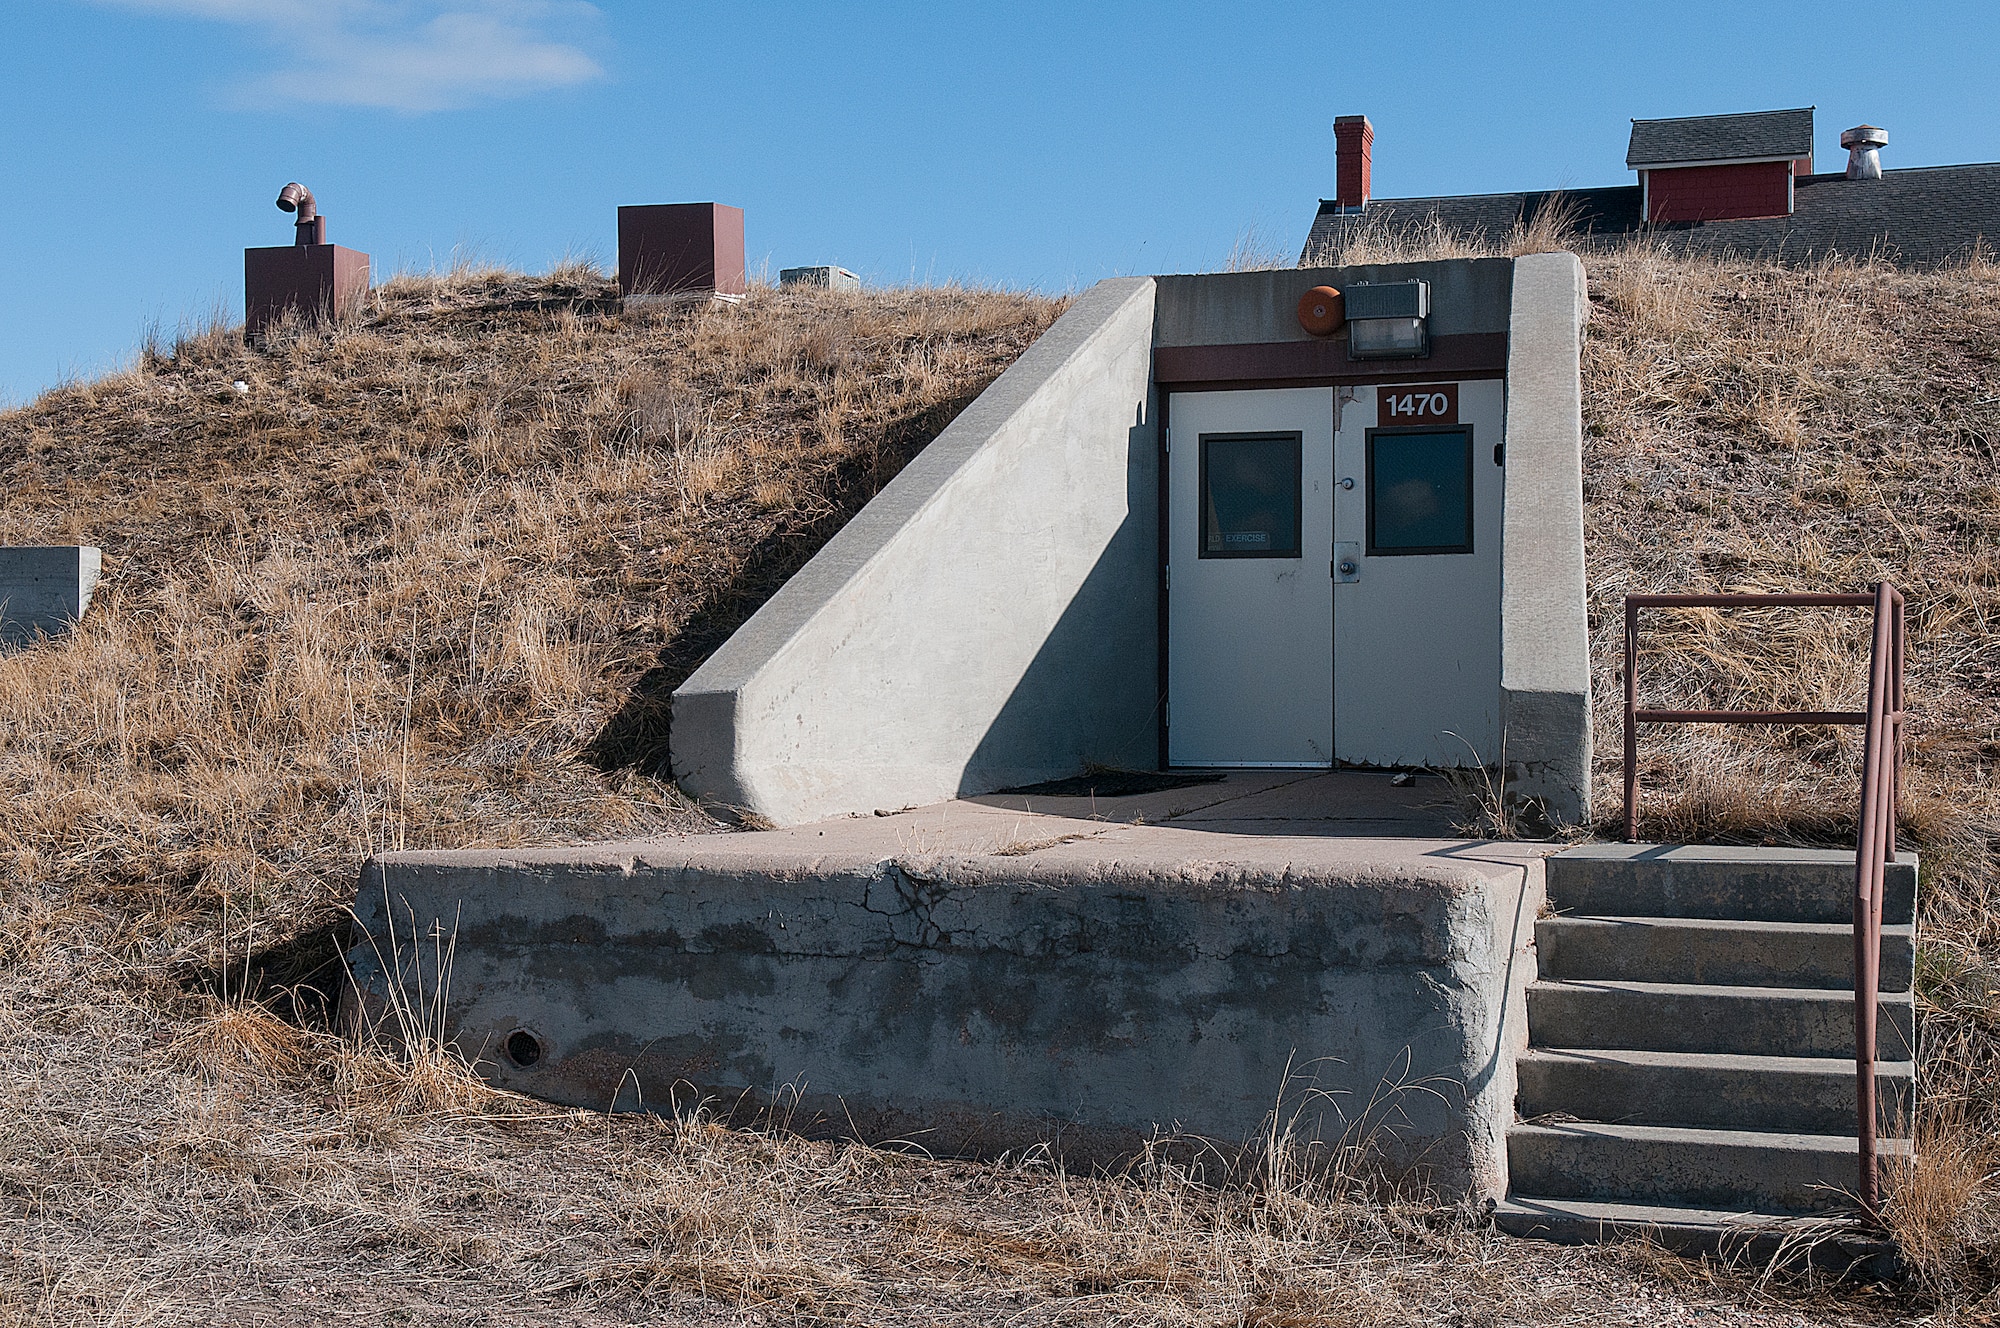 A doorway leads to the underground curation facility, known as “the bunker” on F. E. Warren Air Force Base. The structure, originally built around the turn of the last century for the storage of potatoes, is a climate-controlled facility for the storage of historical documents and artifacts. (U.S. Air Force photo by R.J. Oriez)